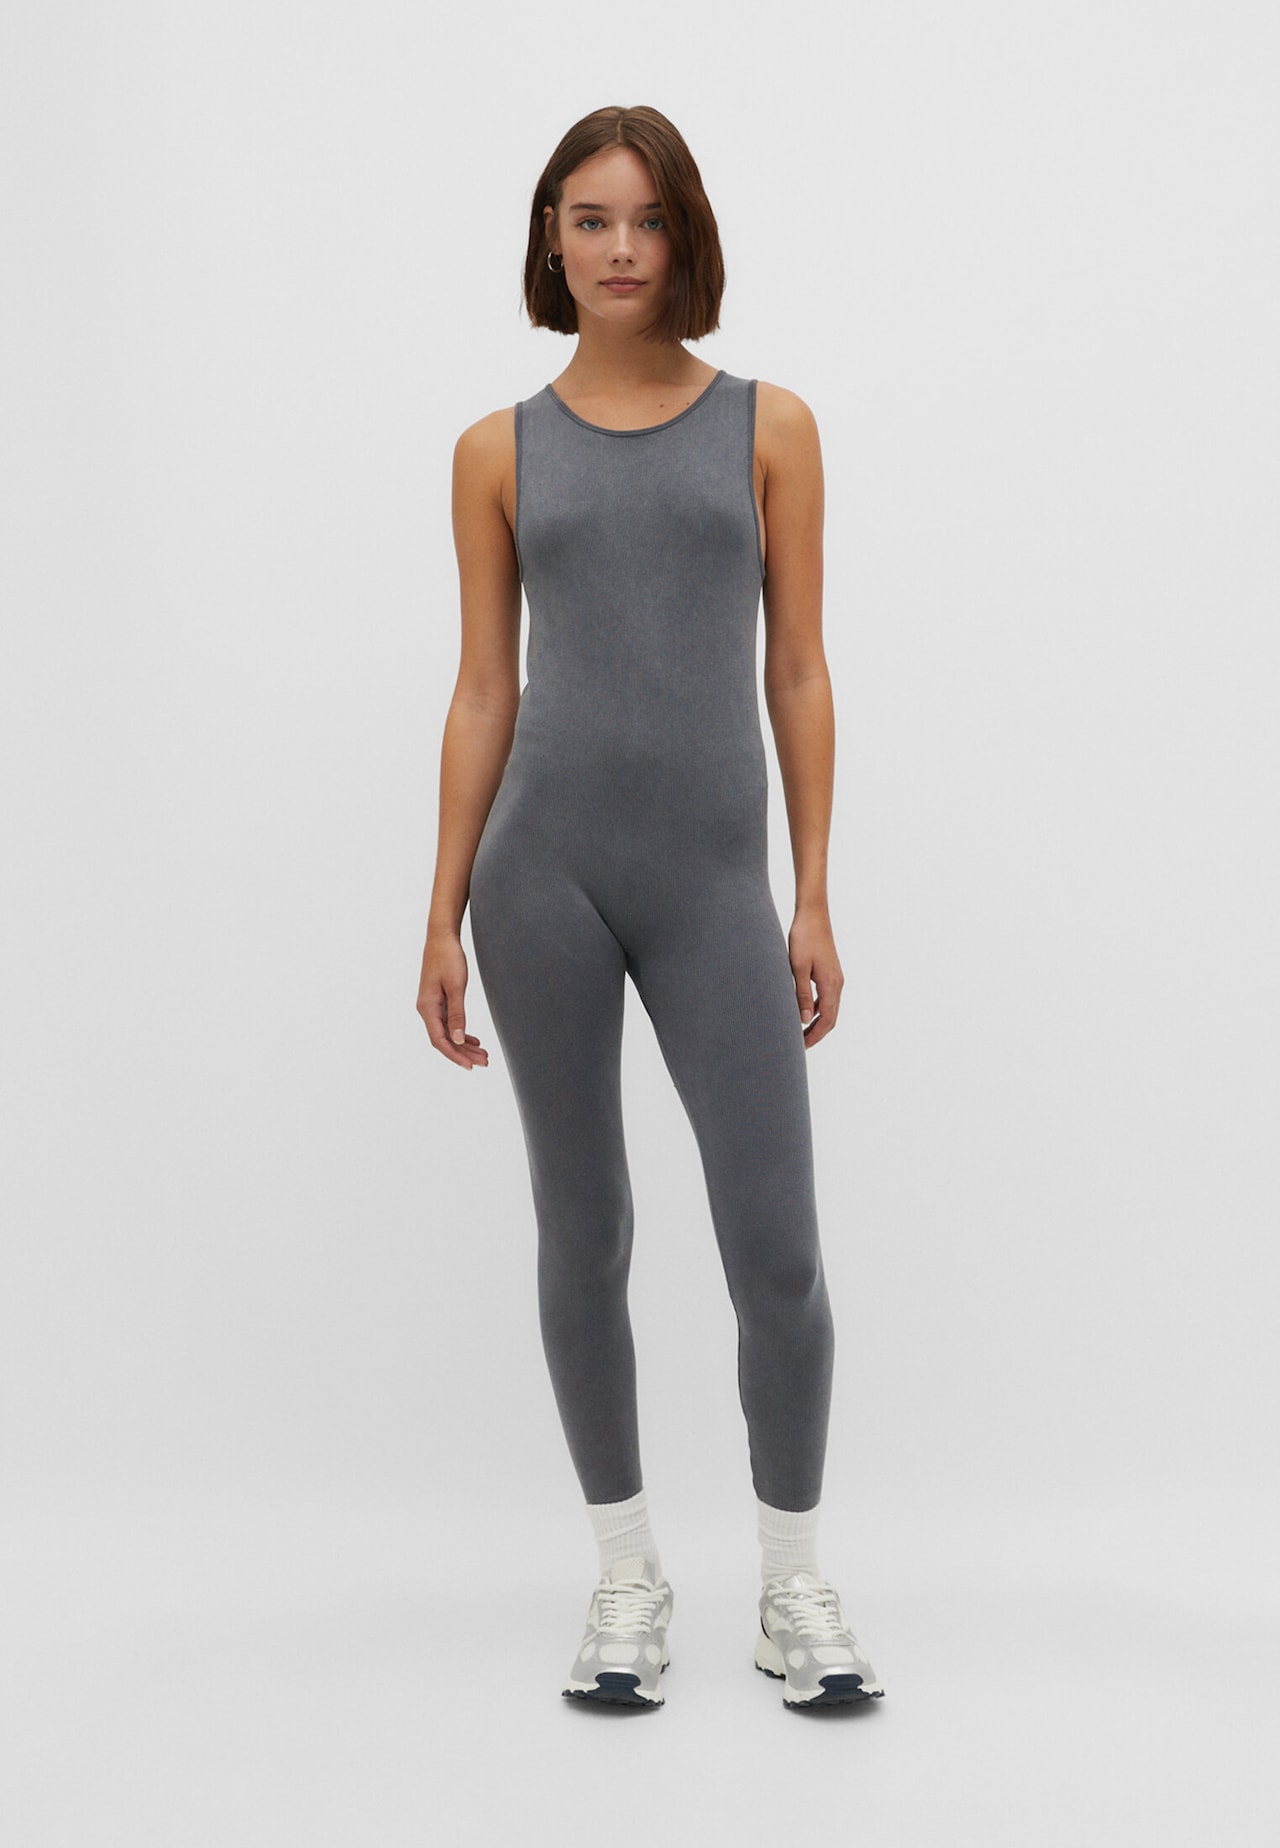 Seamless jumpsuit with low-cut back - Women's fashion